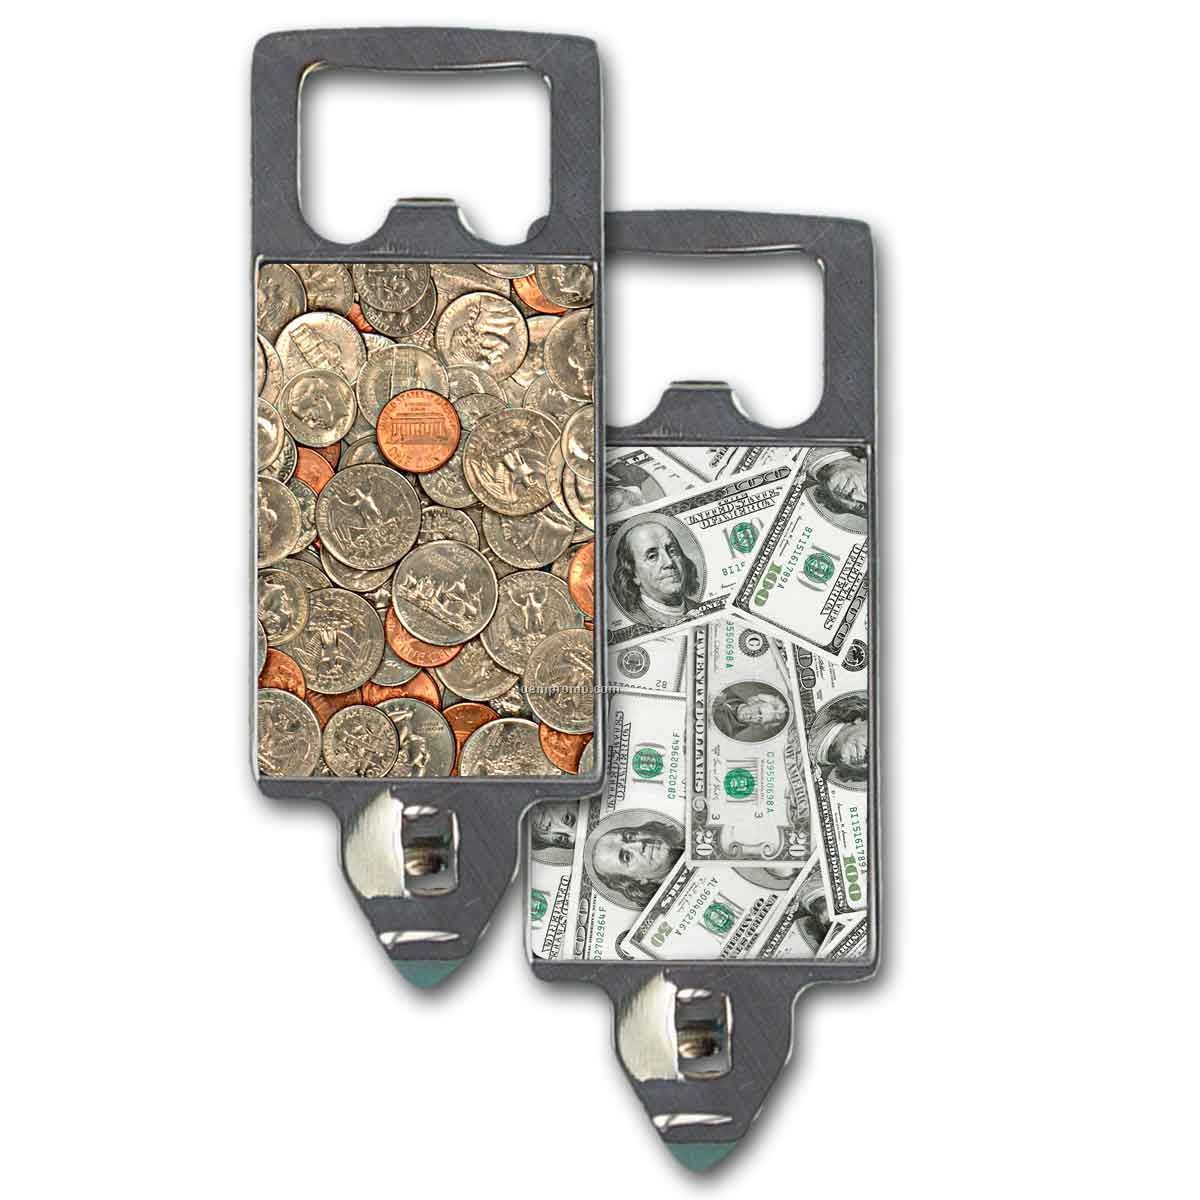 2 In 1 Can And Bottle Opener W/ Animated Dollars And Cents Images (Blank)